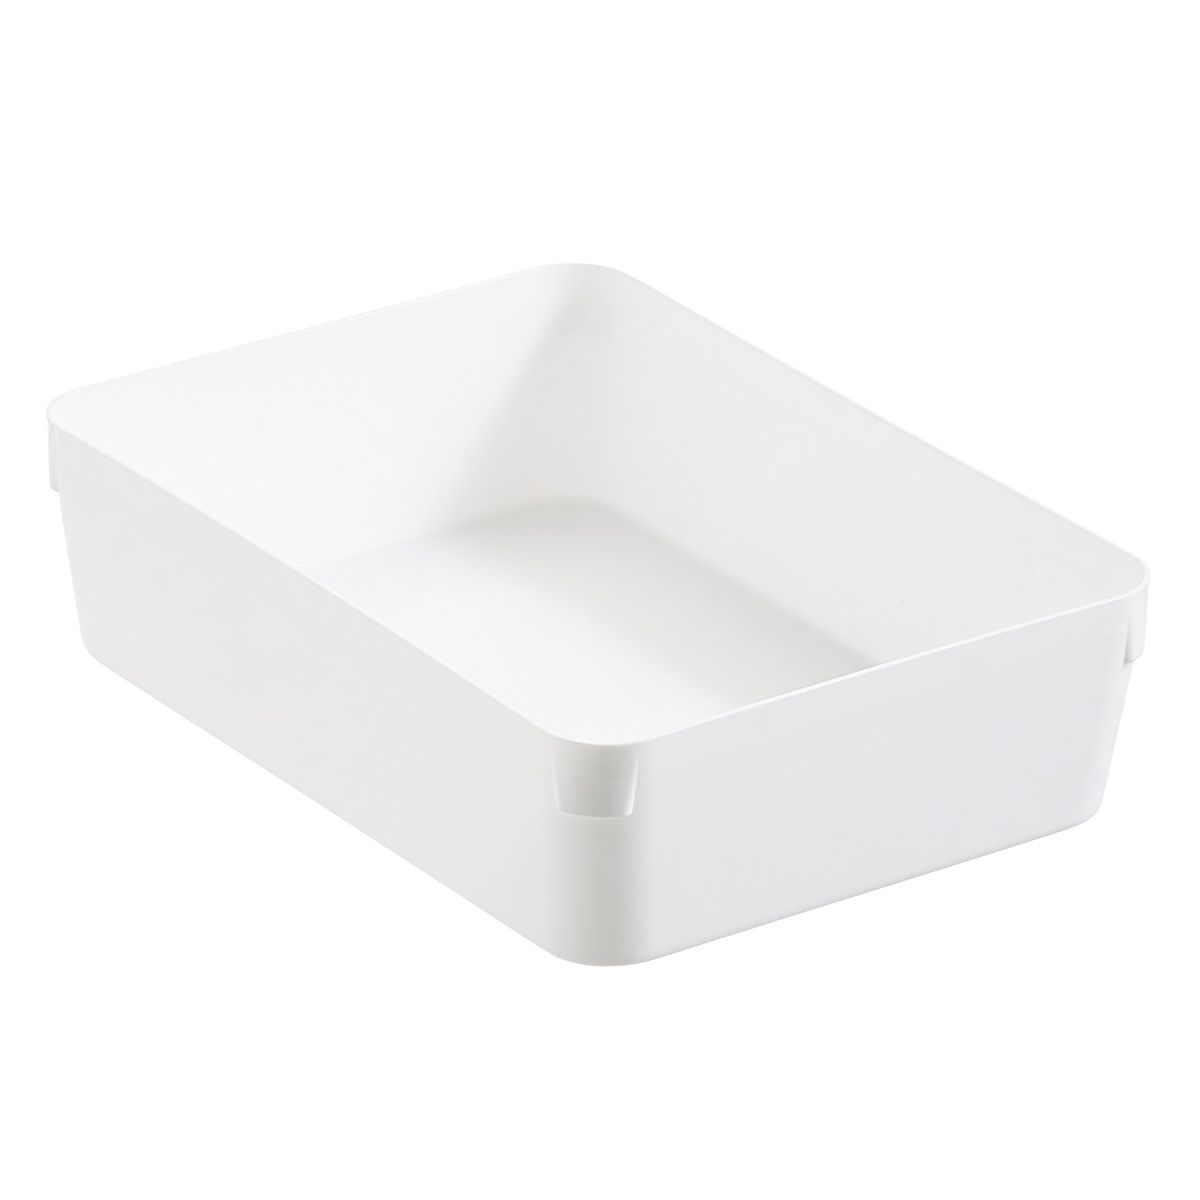 3-Tier Cart Medium Organizer Tray White | The Container Store